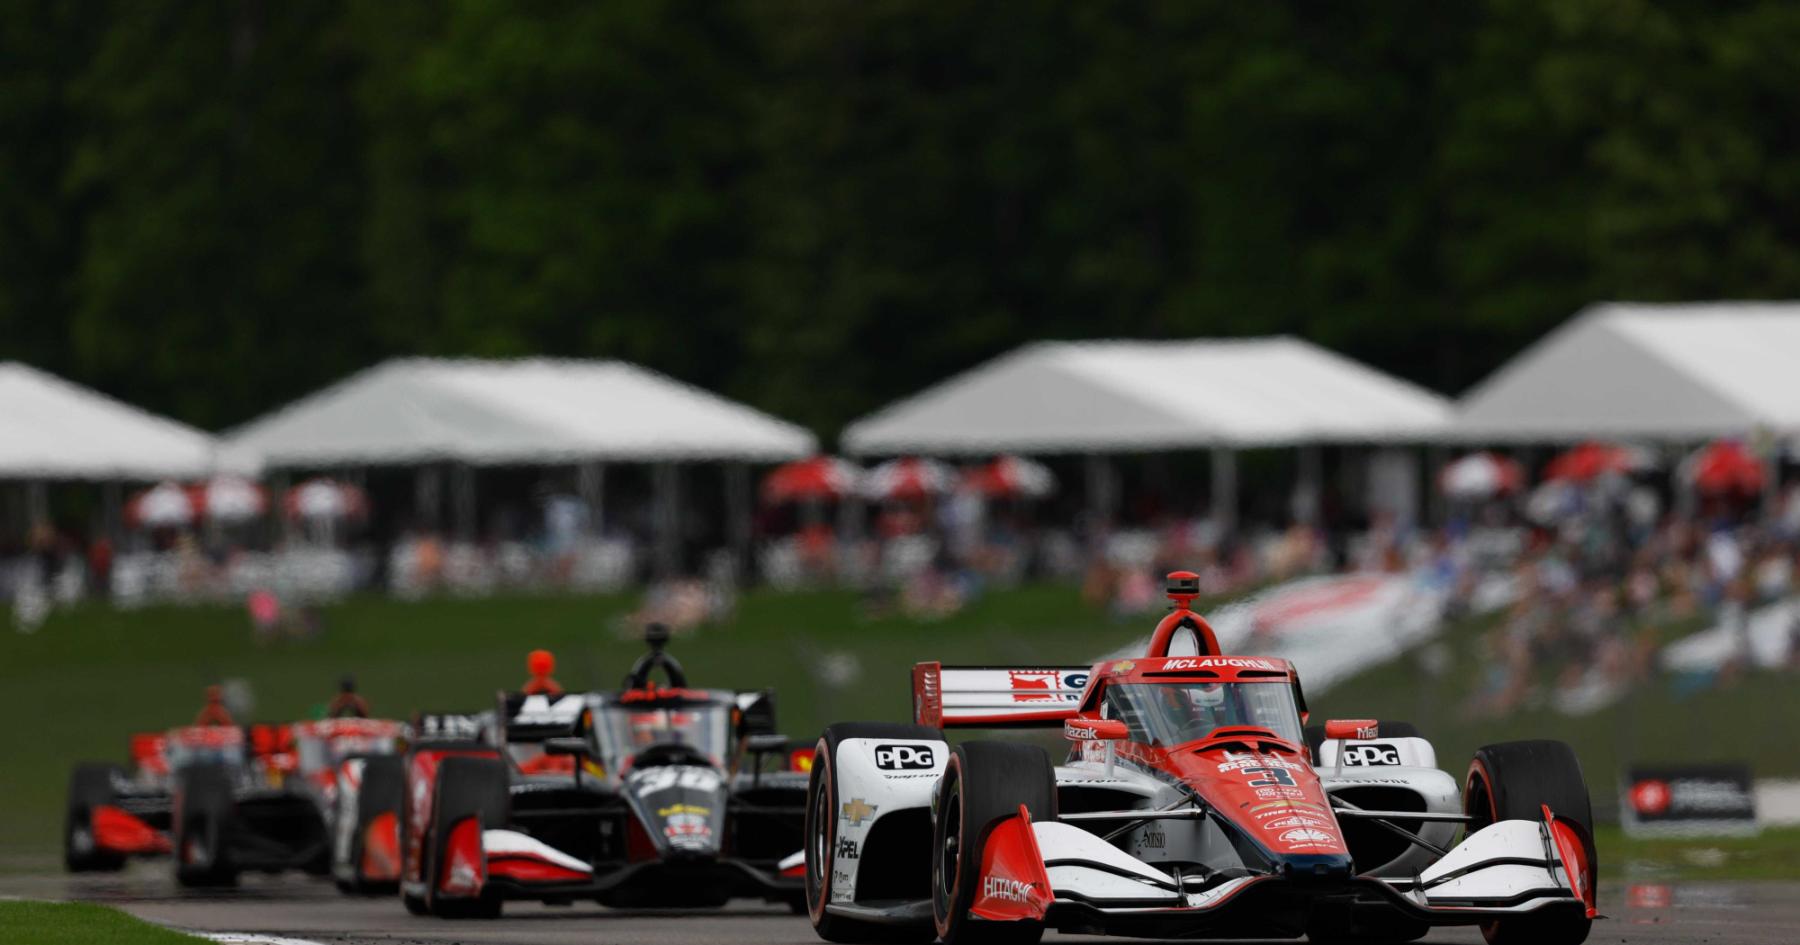 Penalties and Suspensions: Penske Shakes Up Racing World After IndyCar Cheating Scandal